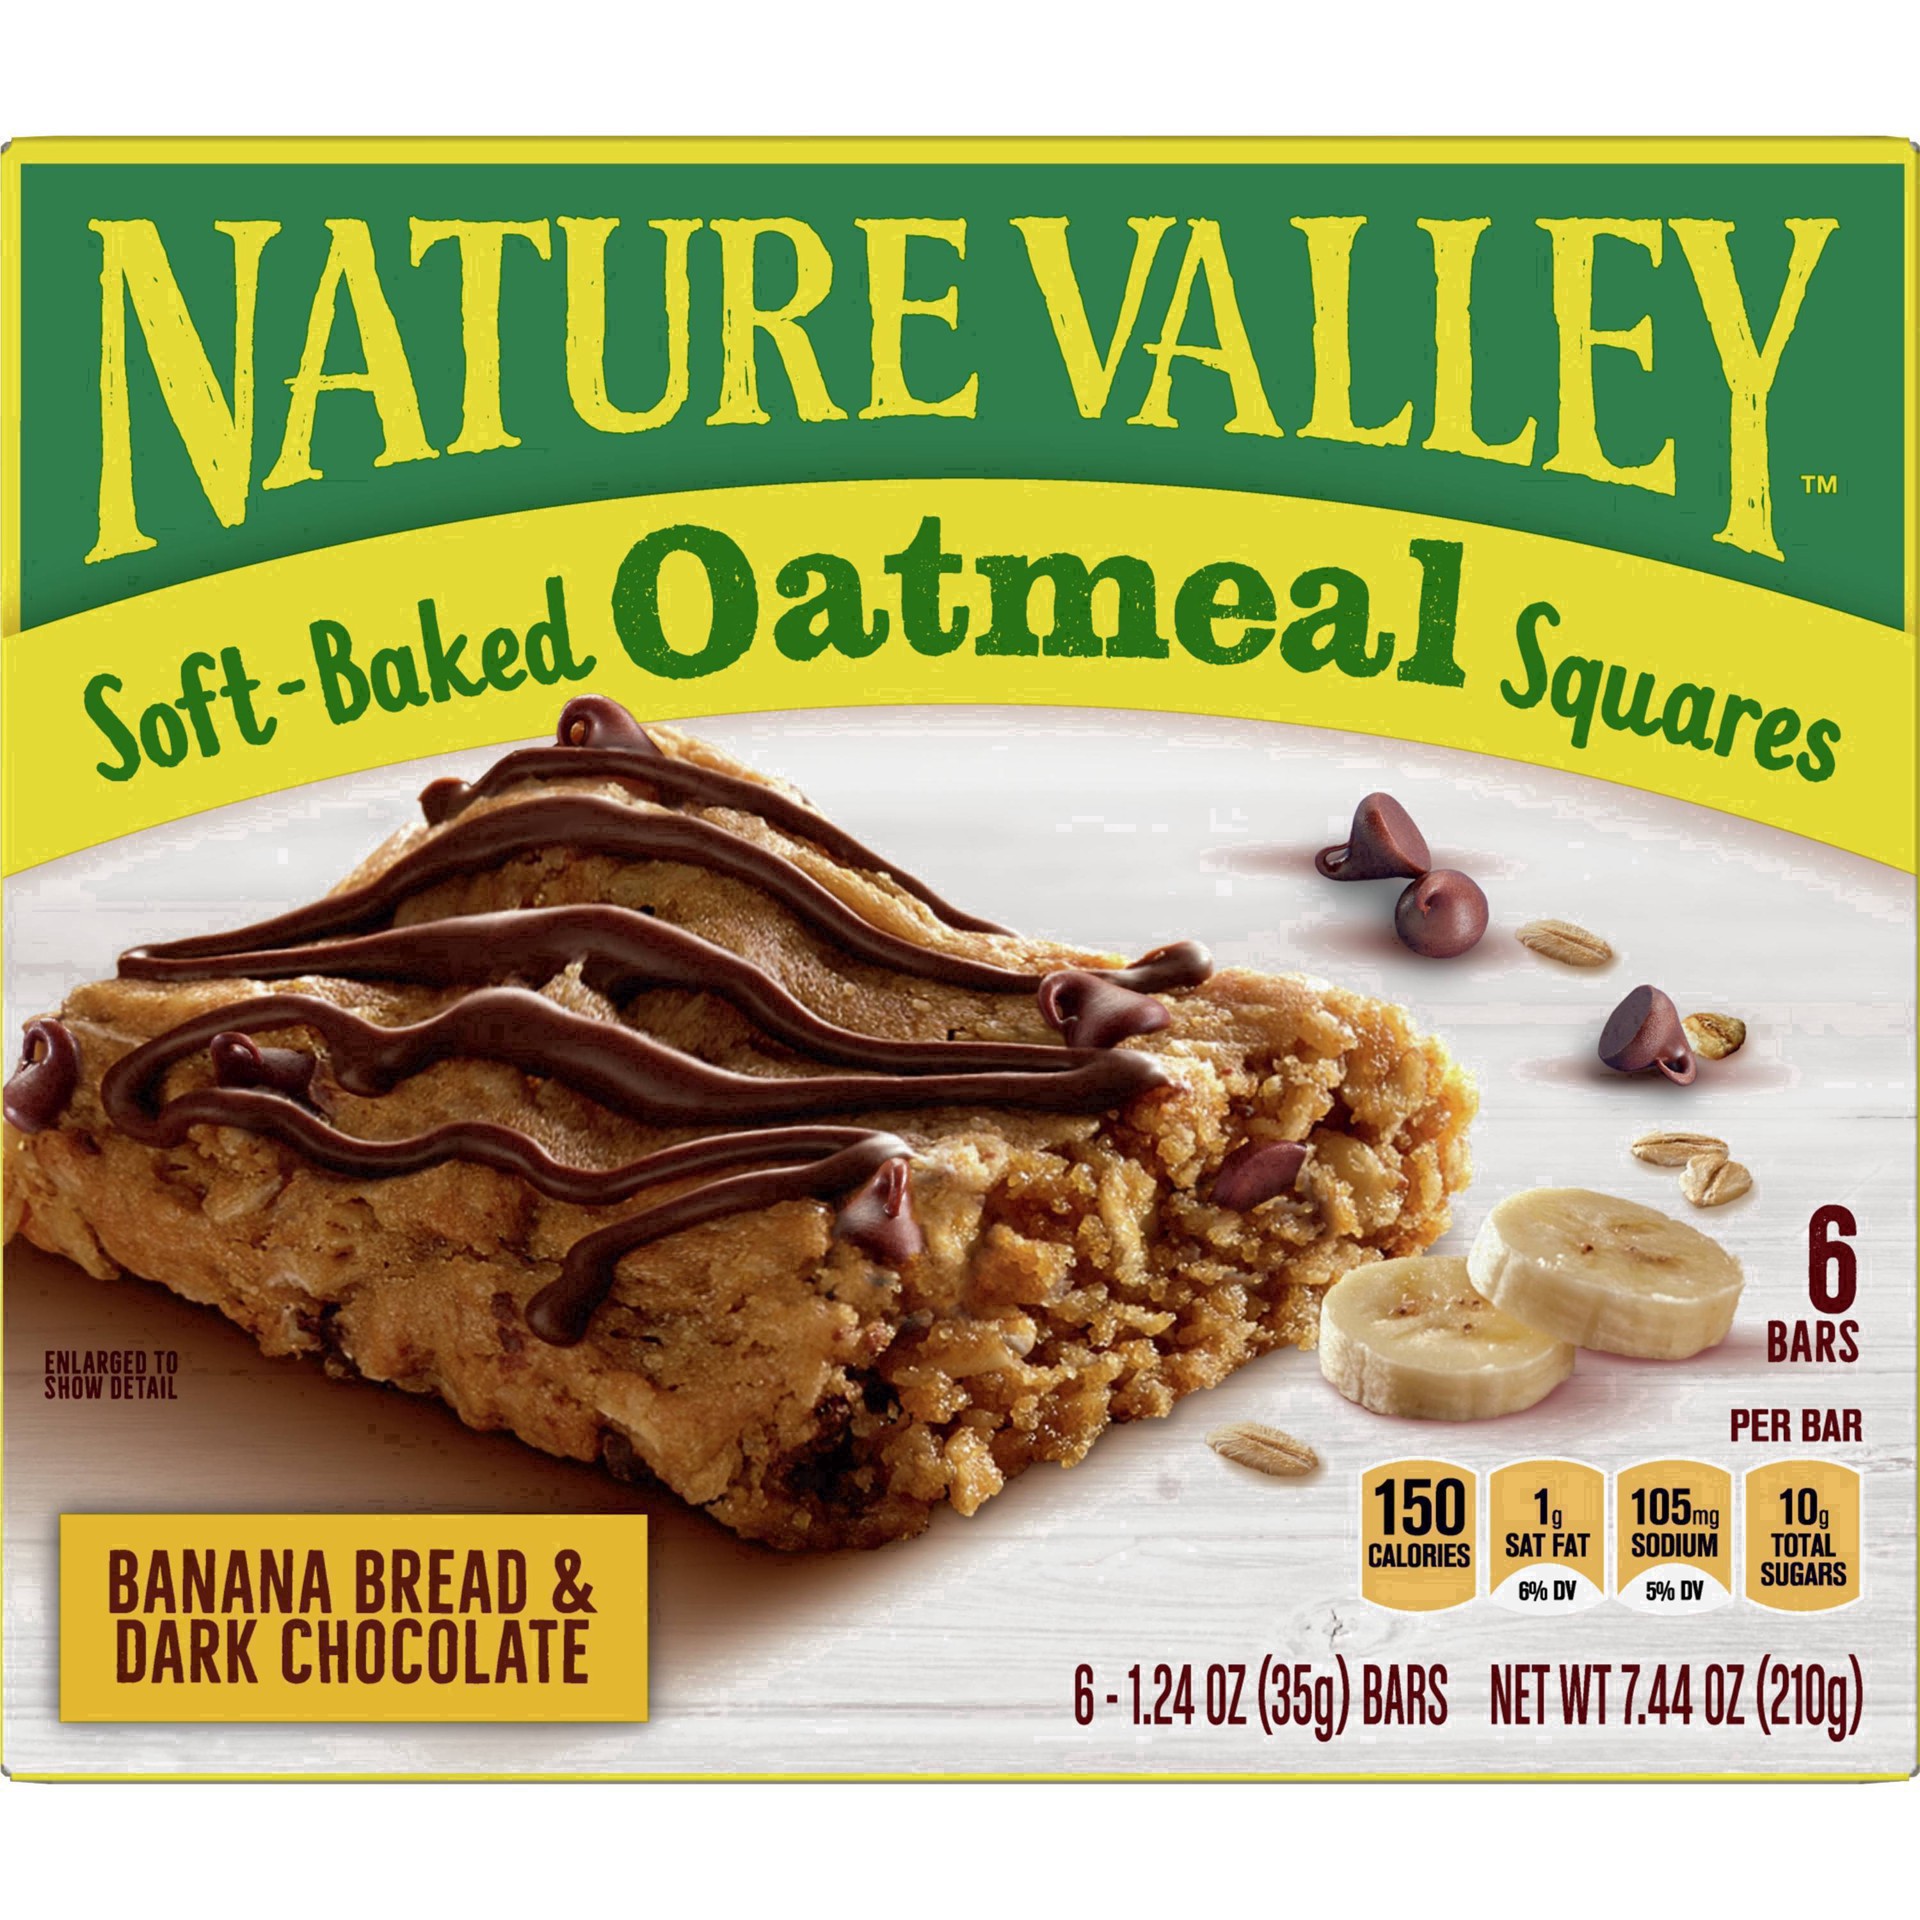 slide 43 of 101, Nature Valley Soft-Baked Oatmeal Squares, Banana Bread & Dark Chocolate, 6 ct, 6 ct